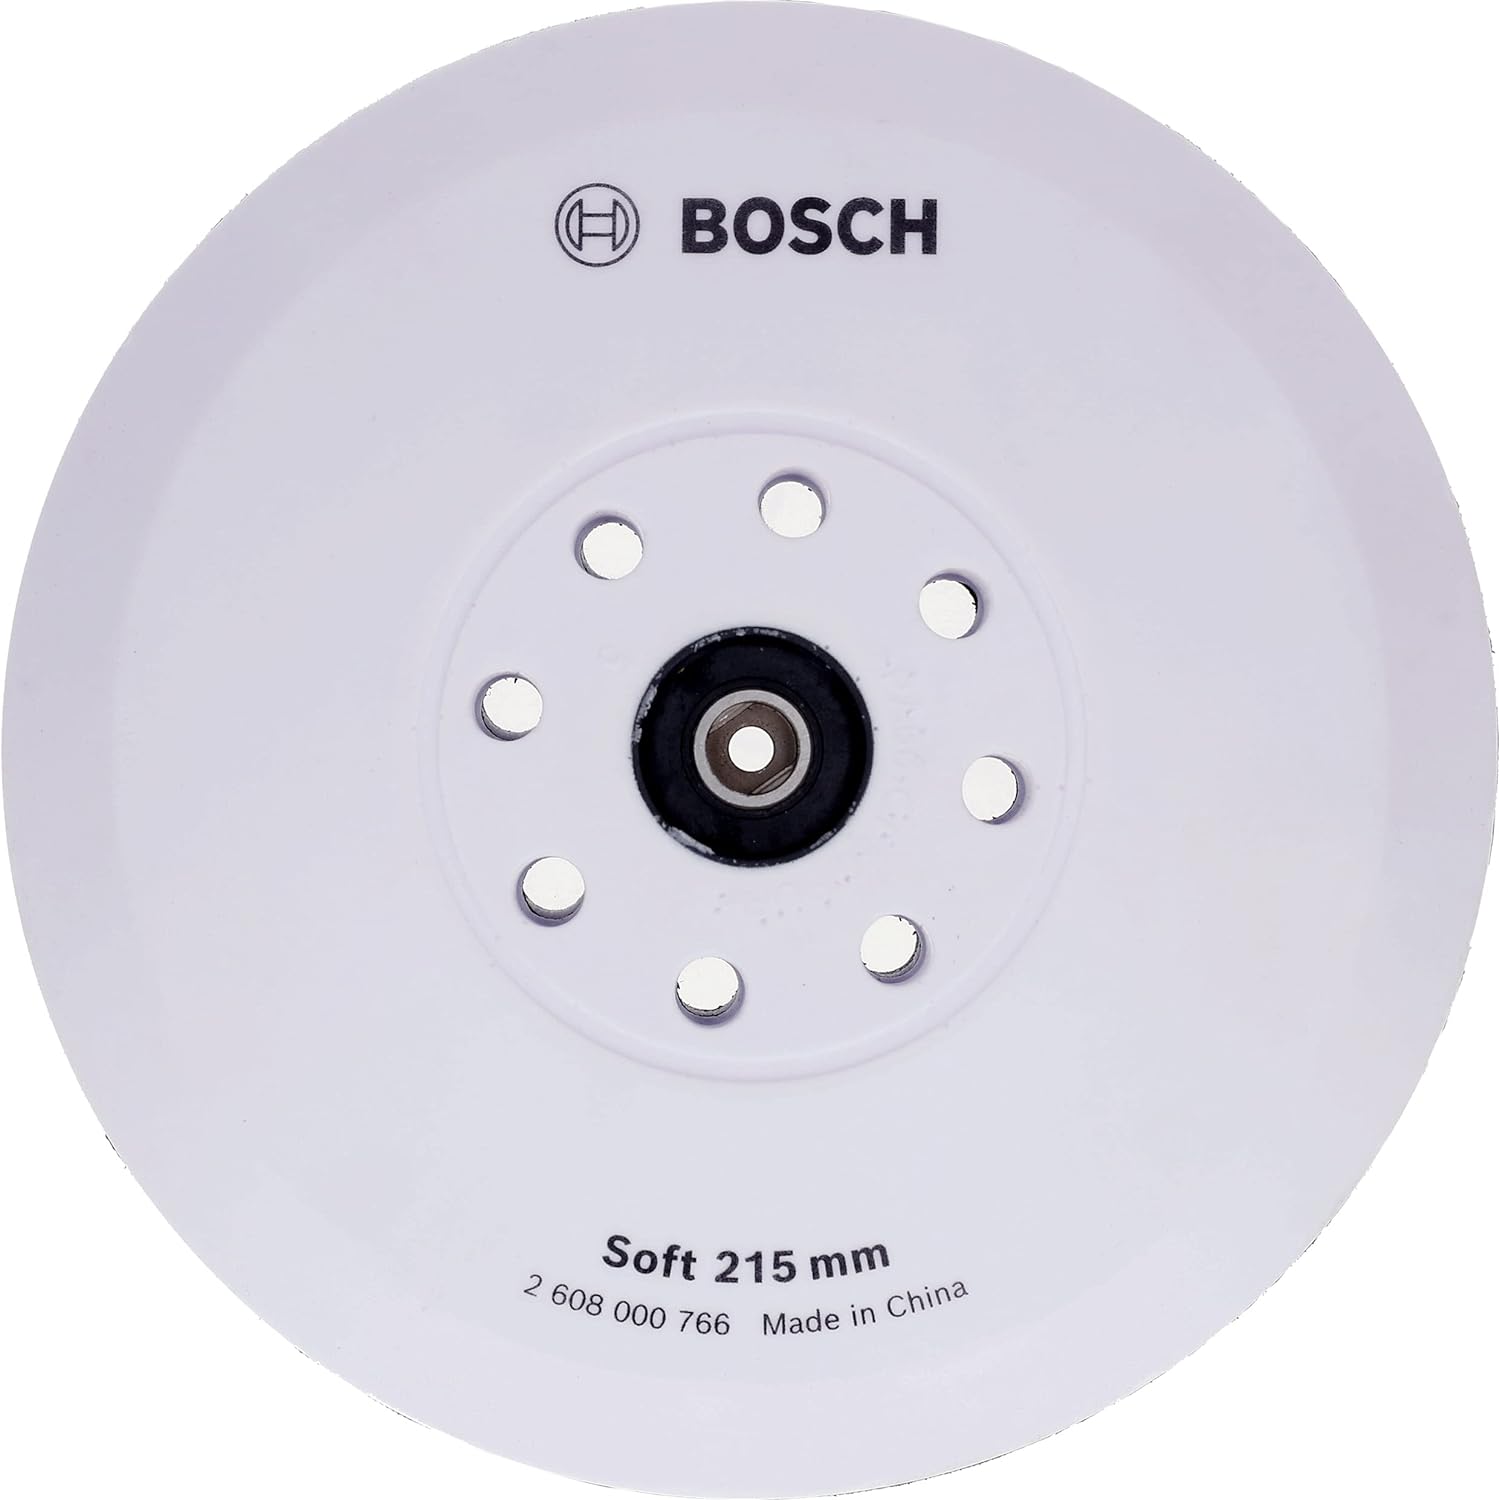 Bosch Backing Pad 225mm, soft 2608000766 Power Tool Services